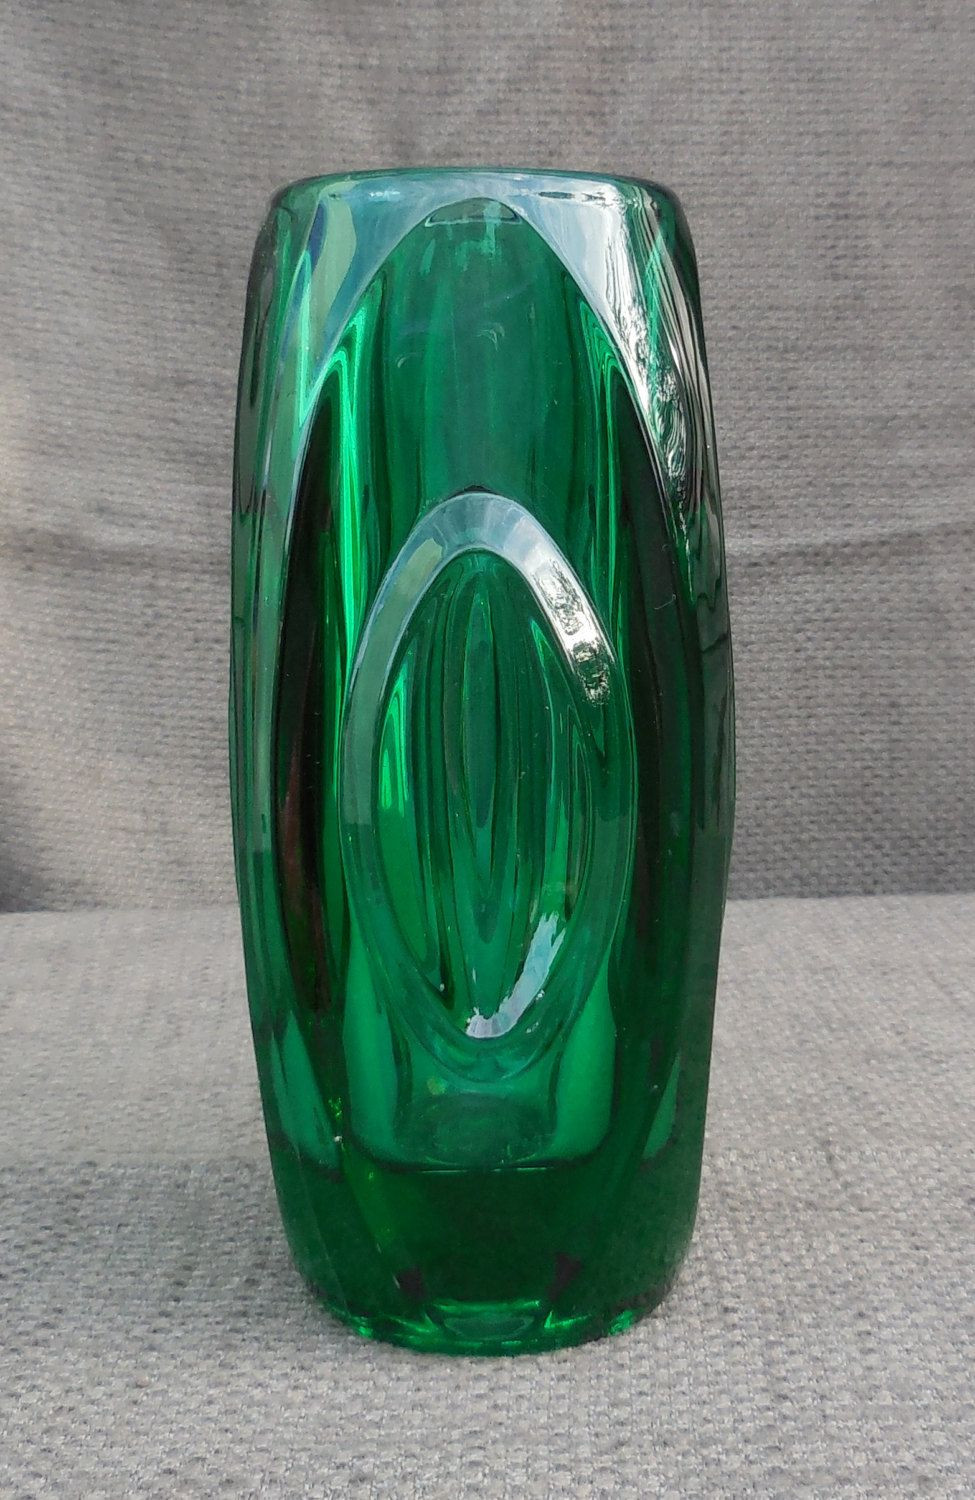 23 Great Double Glass Vase 2024 free download double glass vase of stunning 1950s vintage rosice czech lens green art glass vase by with regard to stunning 1950s vintage rosice czech lens green art glass vase by rudolph schrotter